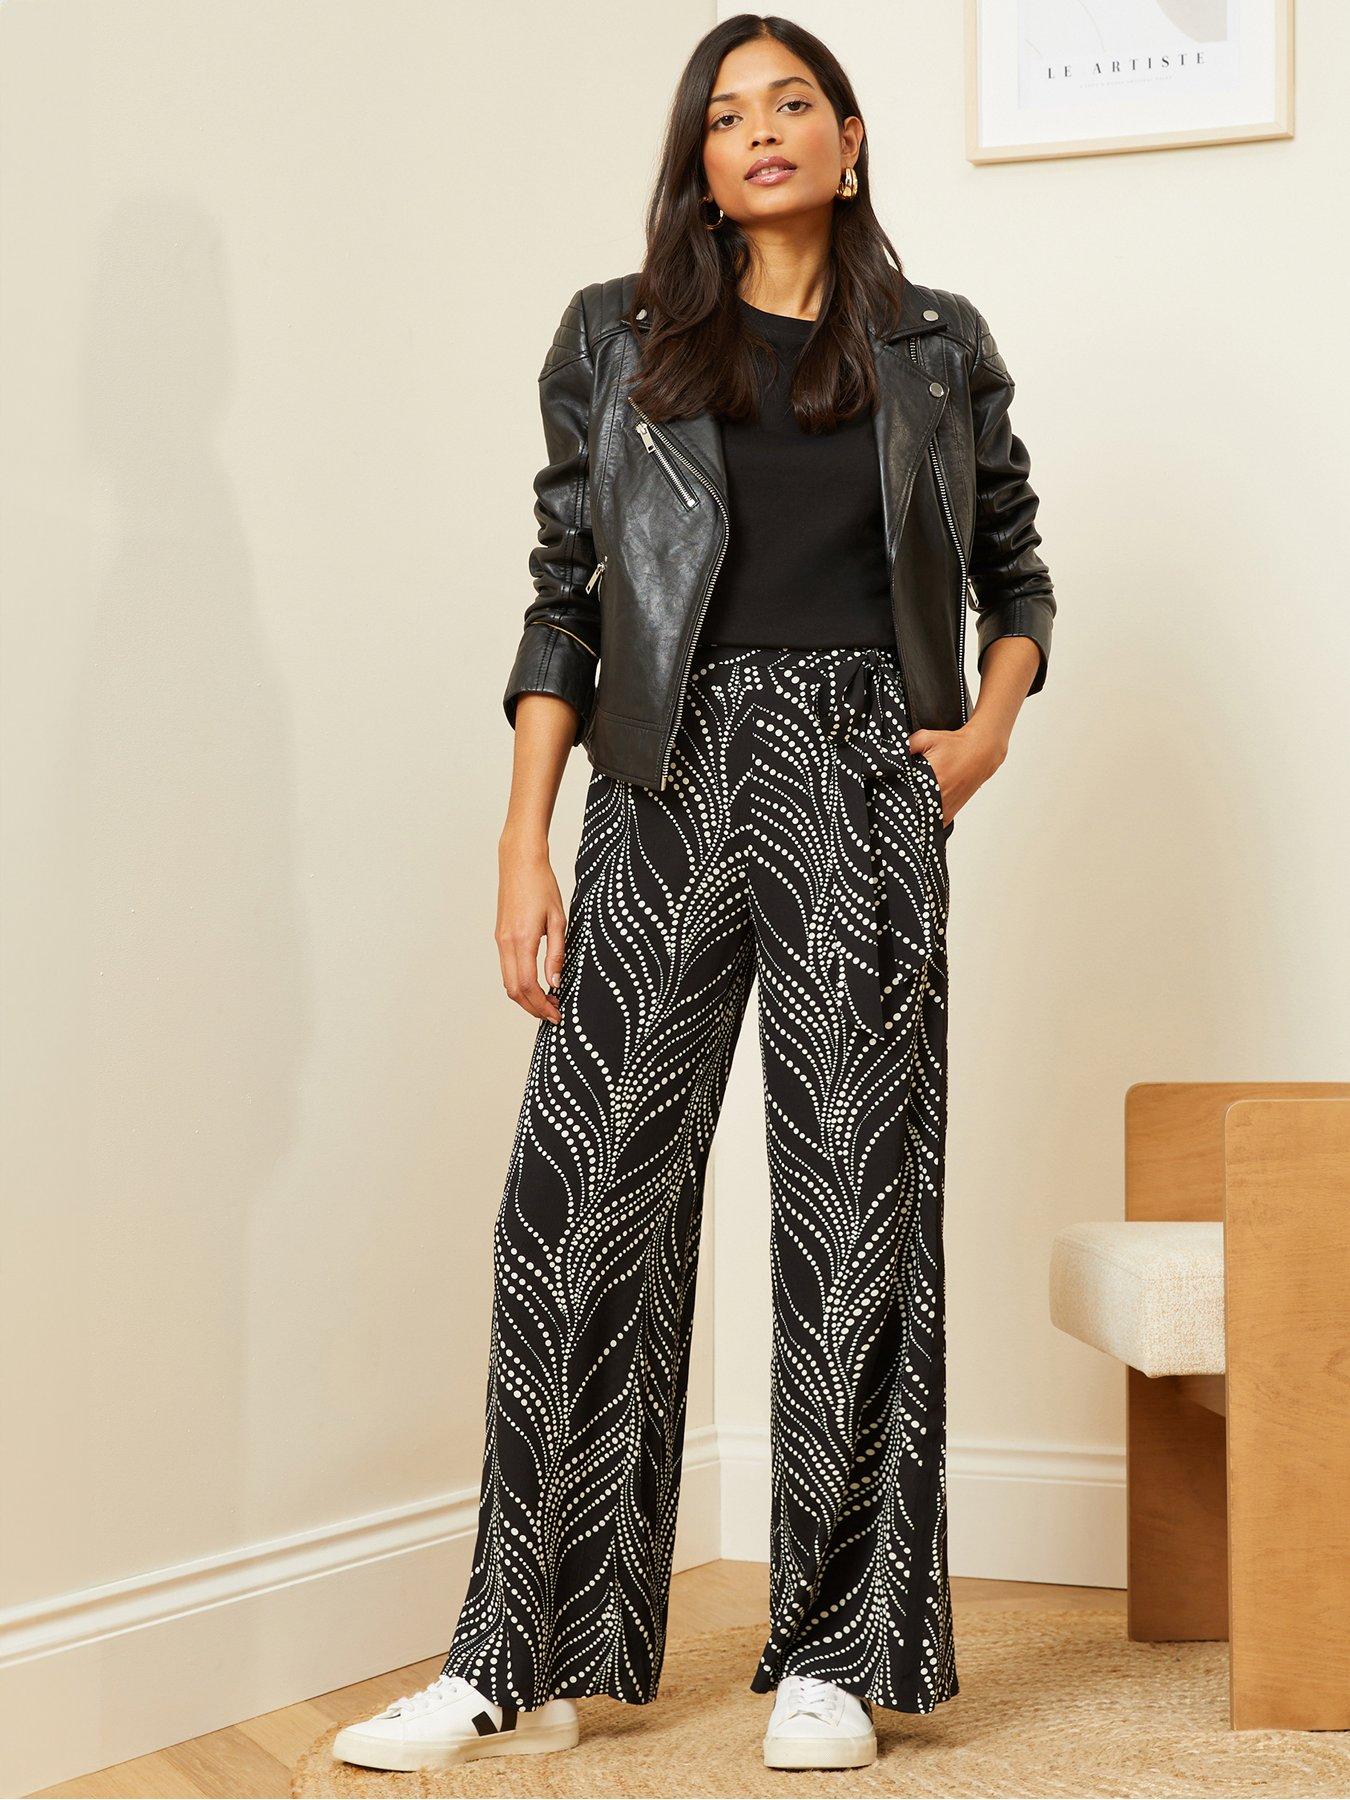 Lucy Mecklenburgh x V by Very Belted Wide Leg Trousers - Black